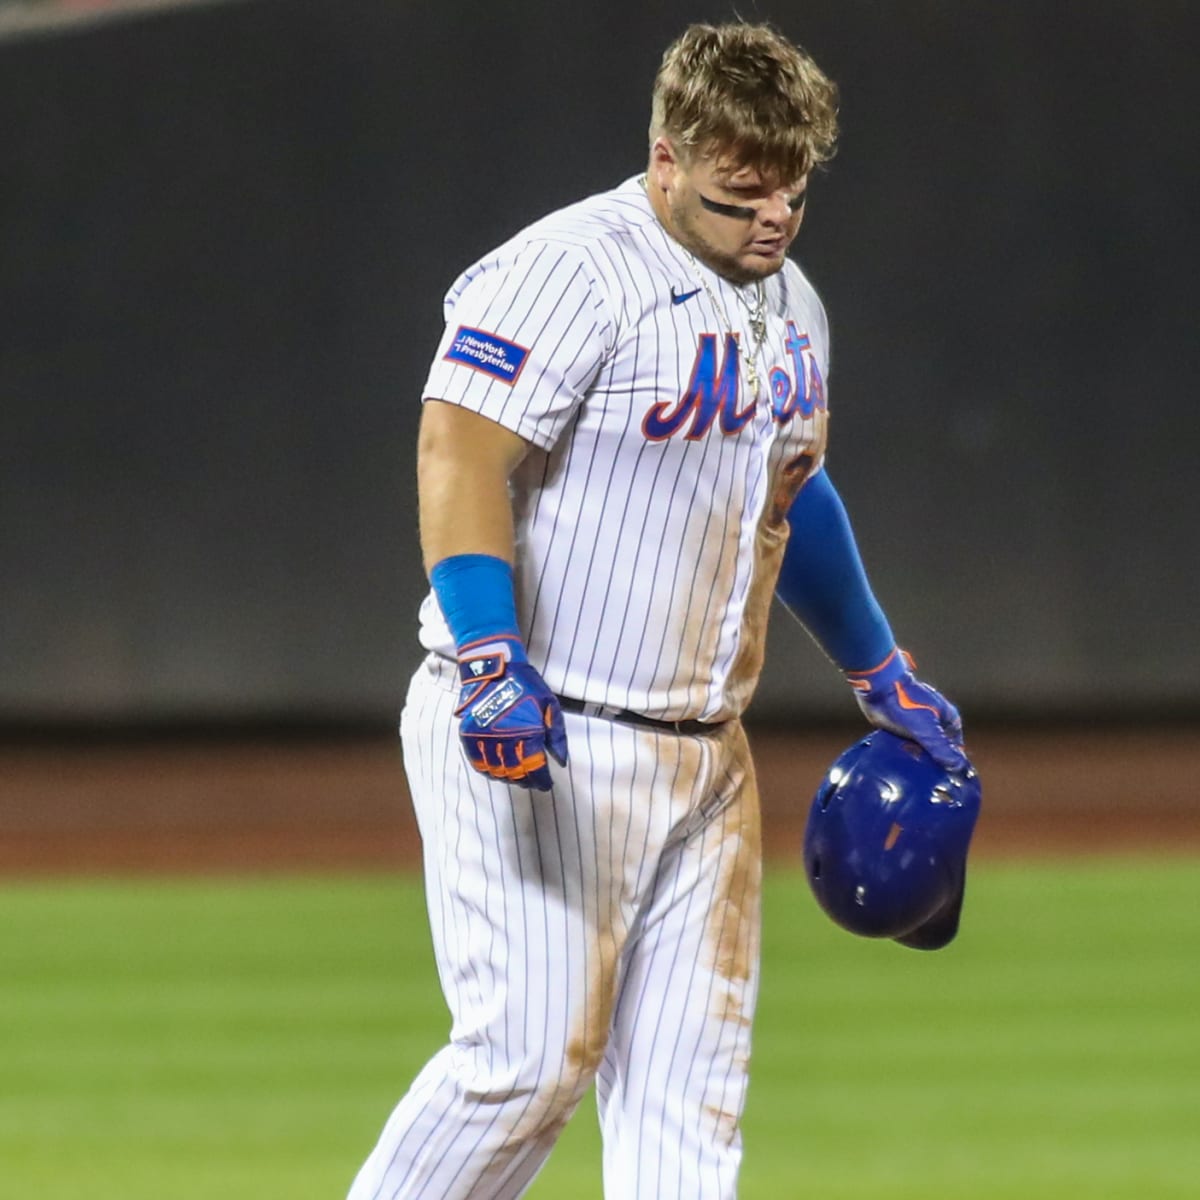 Daniel Vogelbach Gives the Mets Big Hits and Big Laughs - The New